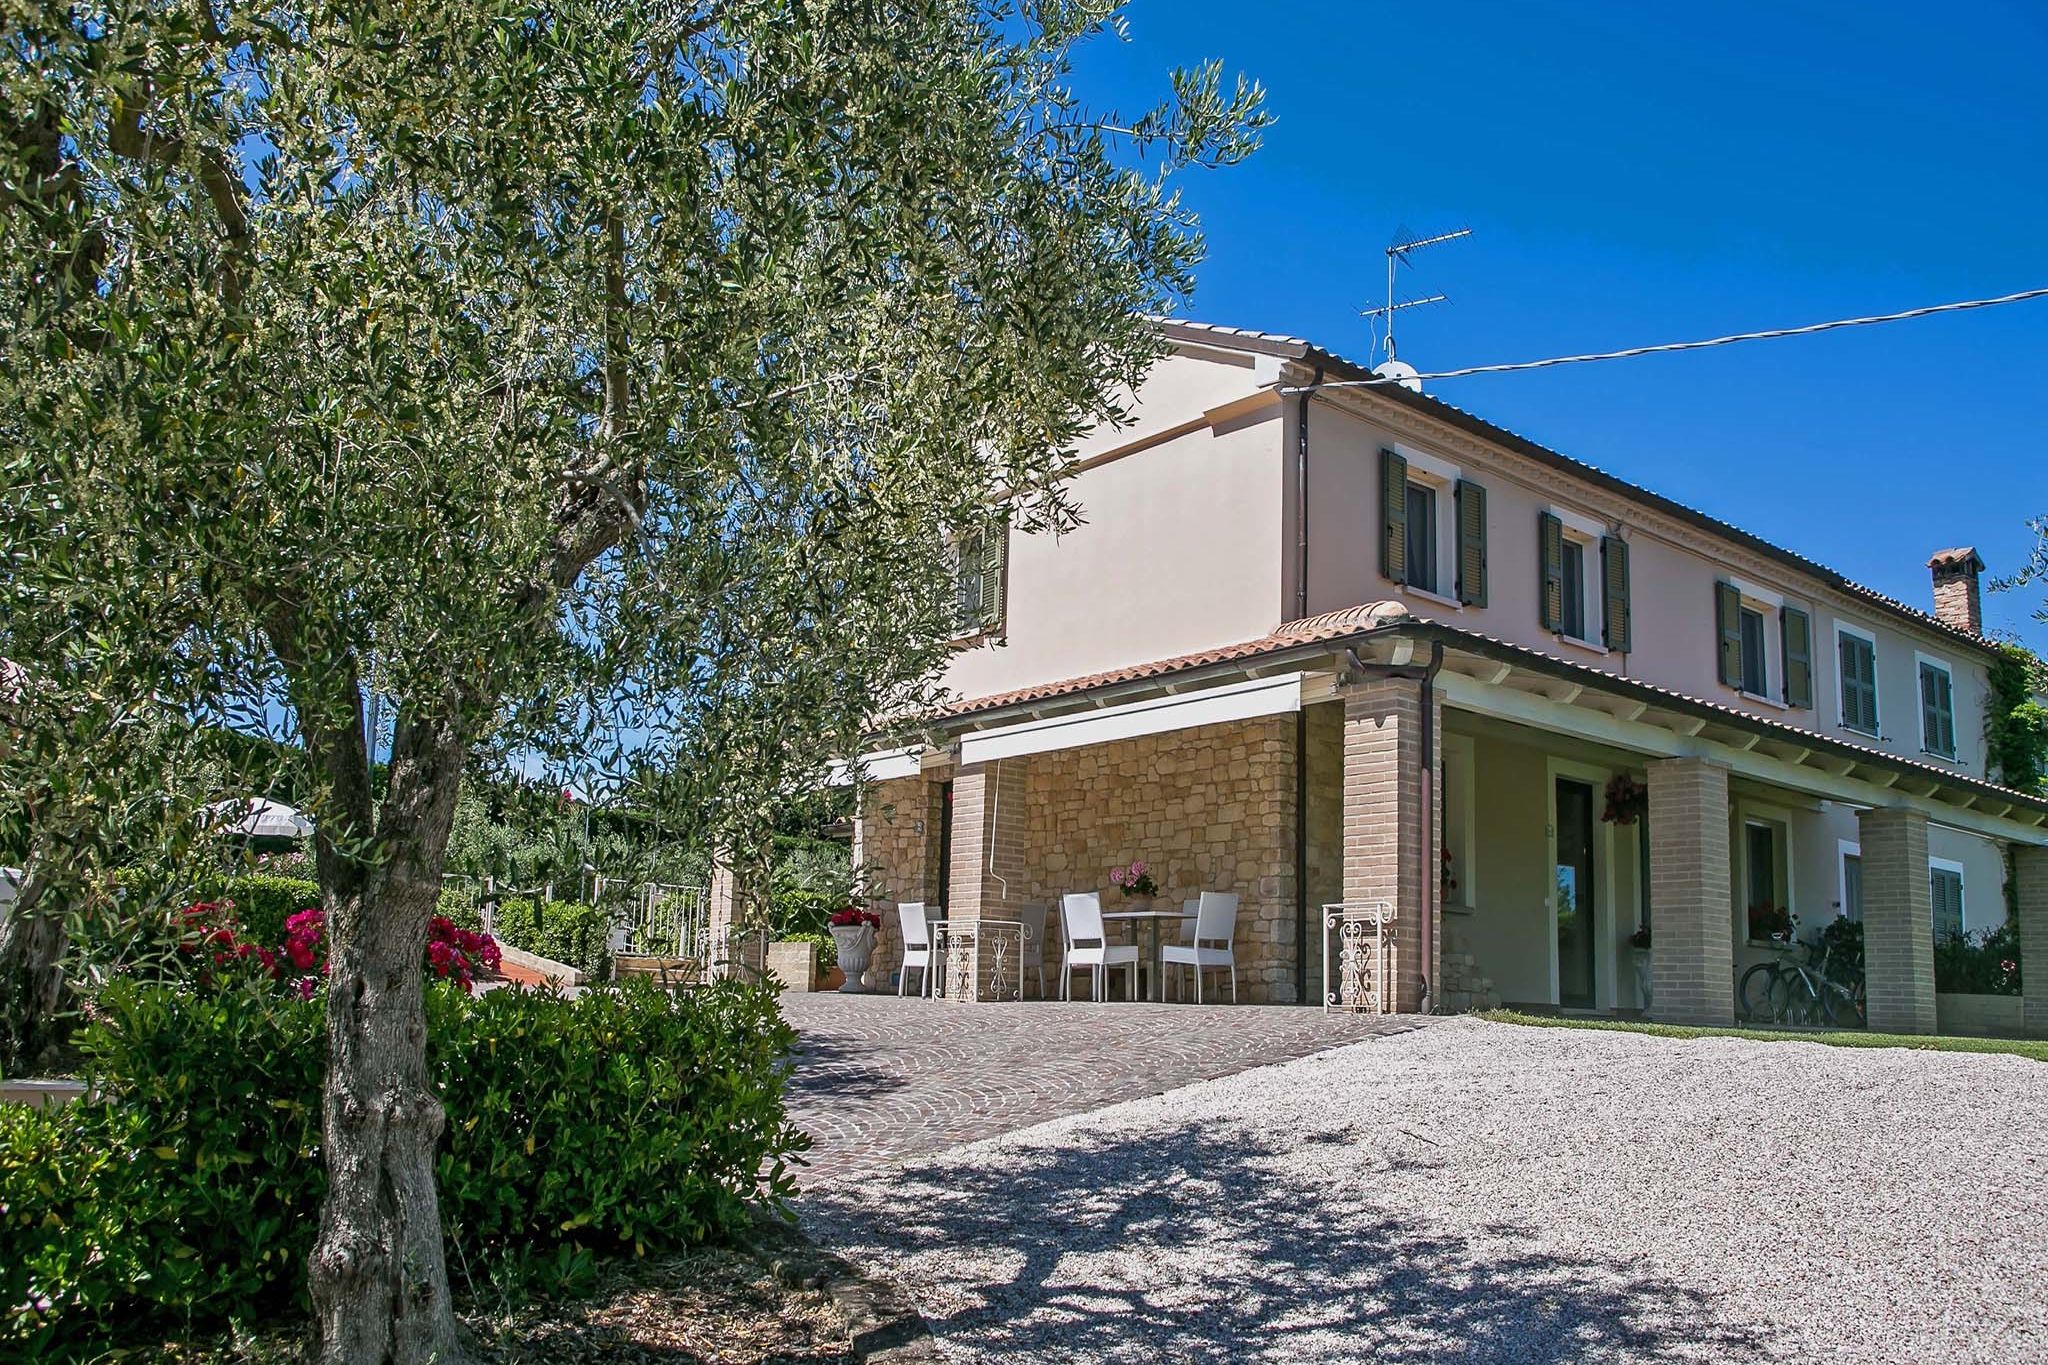 Romantically furnished villa with private swimming pool, 4 km from the sea and seaside resort Fano